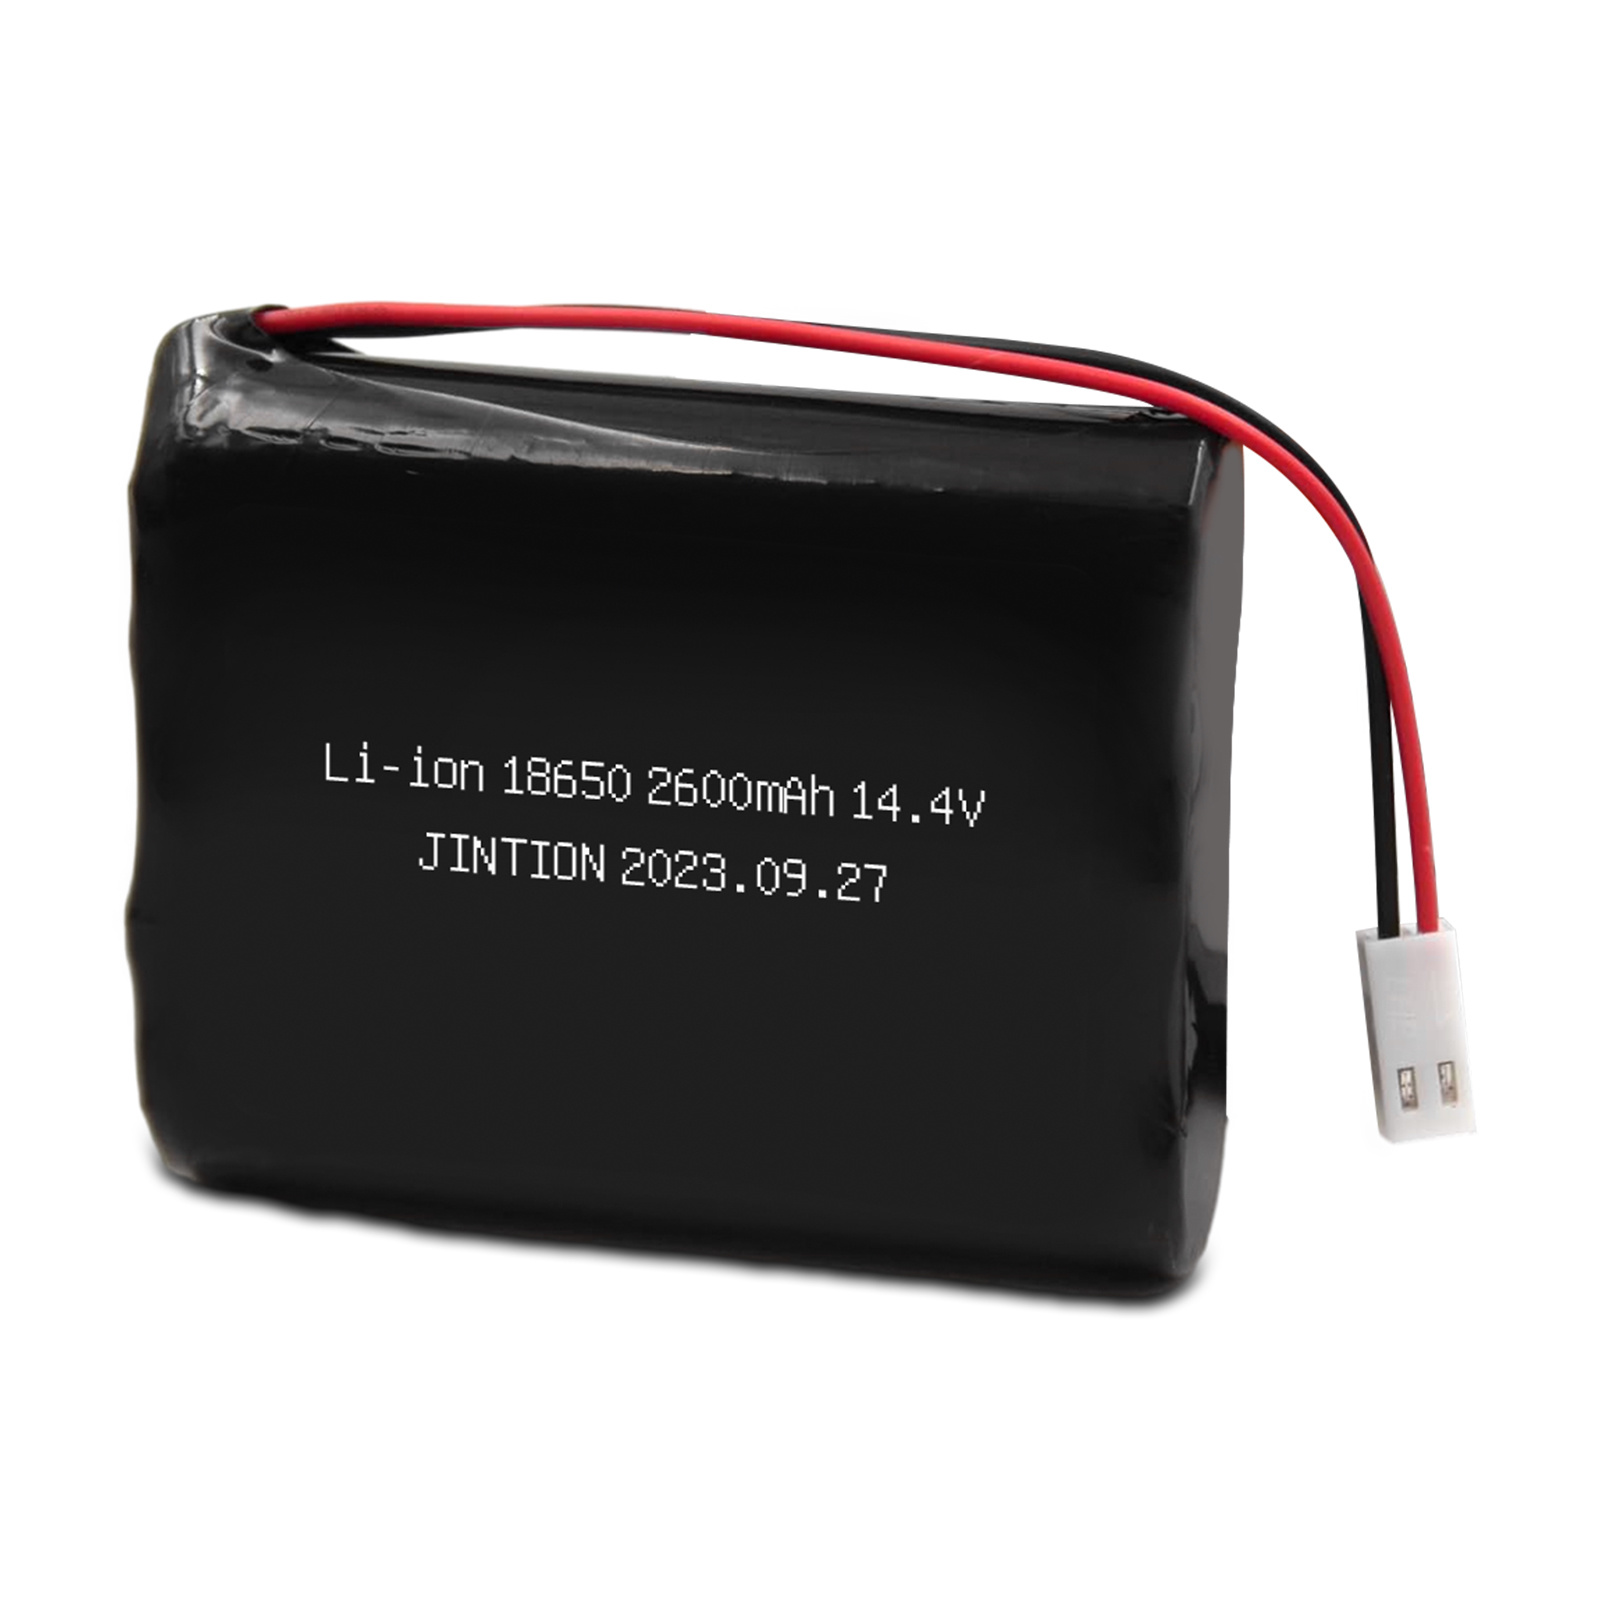 8650 2600mAh 14.8v cell lithium Lithium Ion Batteries 3.7v 18650 battery with Female 2POS .100 W RAMP RIB Bare Leads